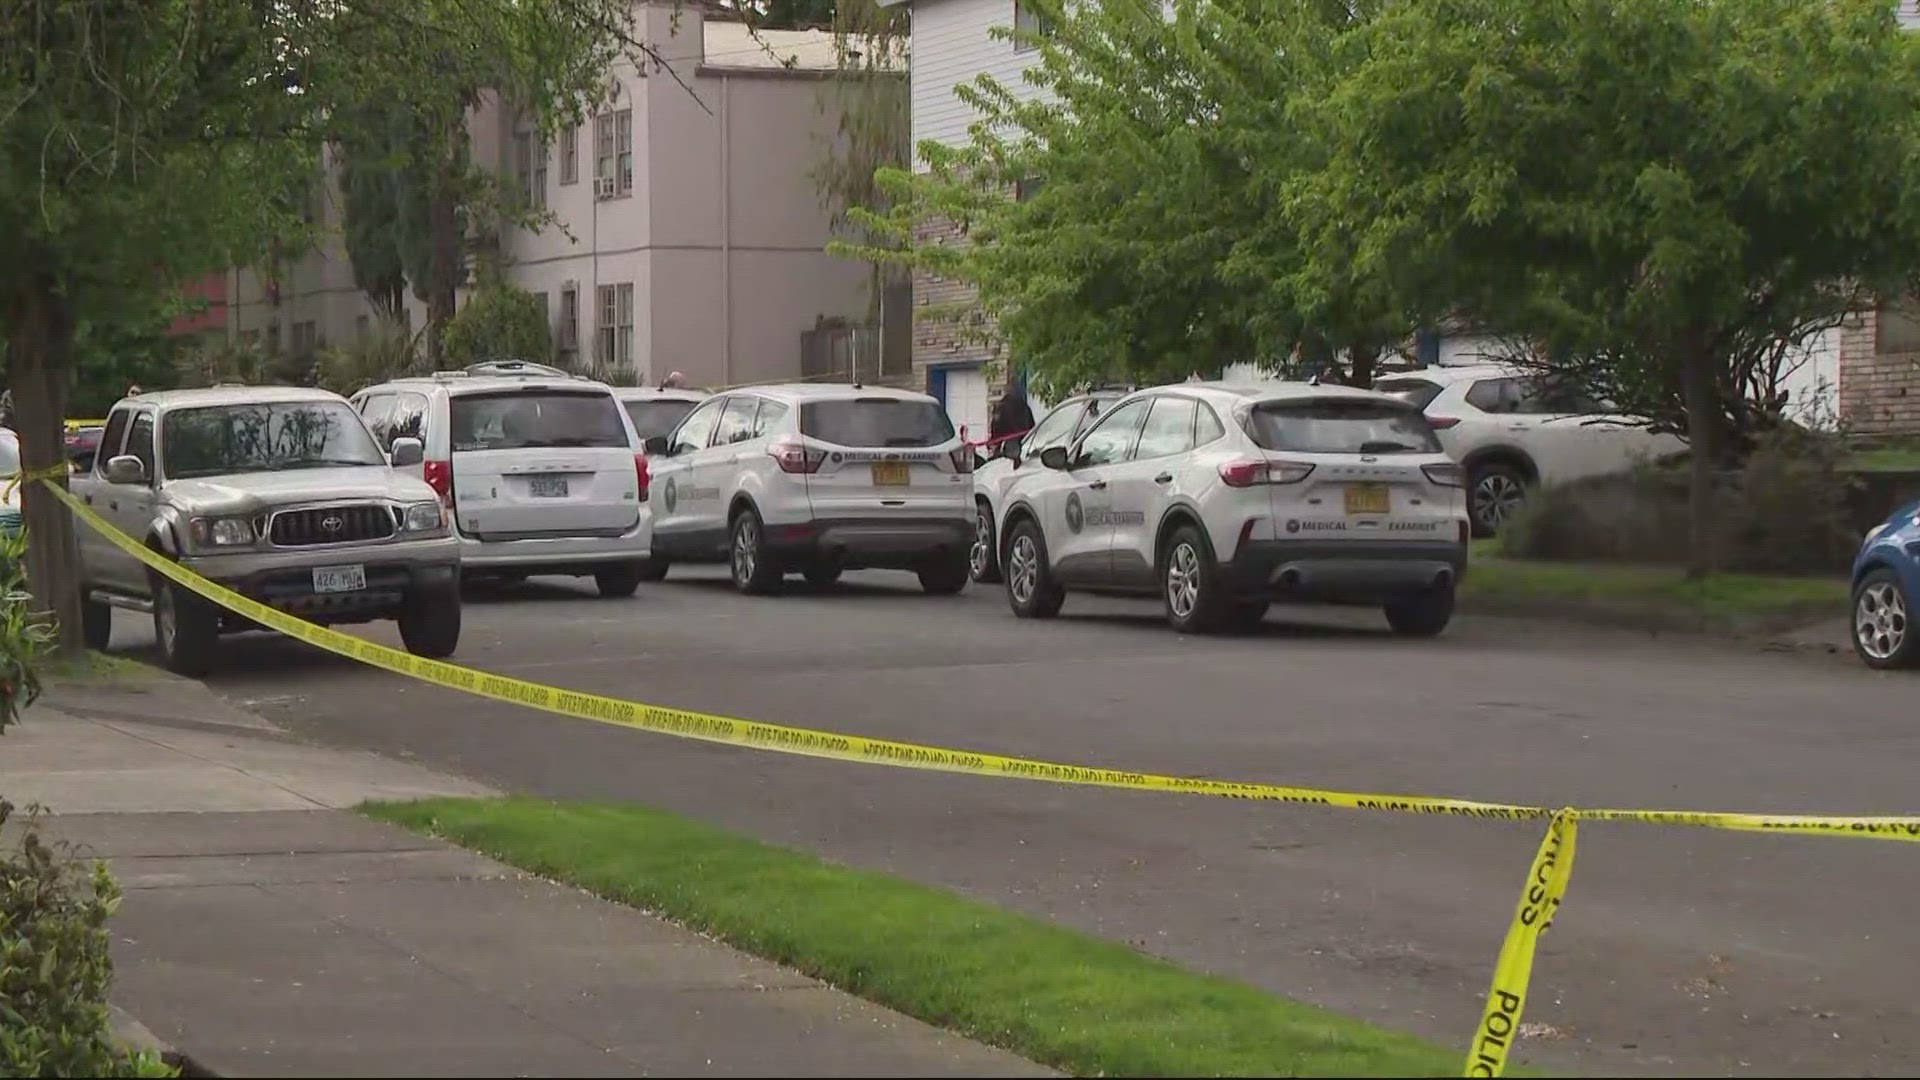 Portland police investigate a homicide in Portland’s Kern neighborhood after one person was killed in a fight Monday afternoon outside an apartment complex.